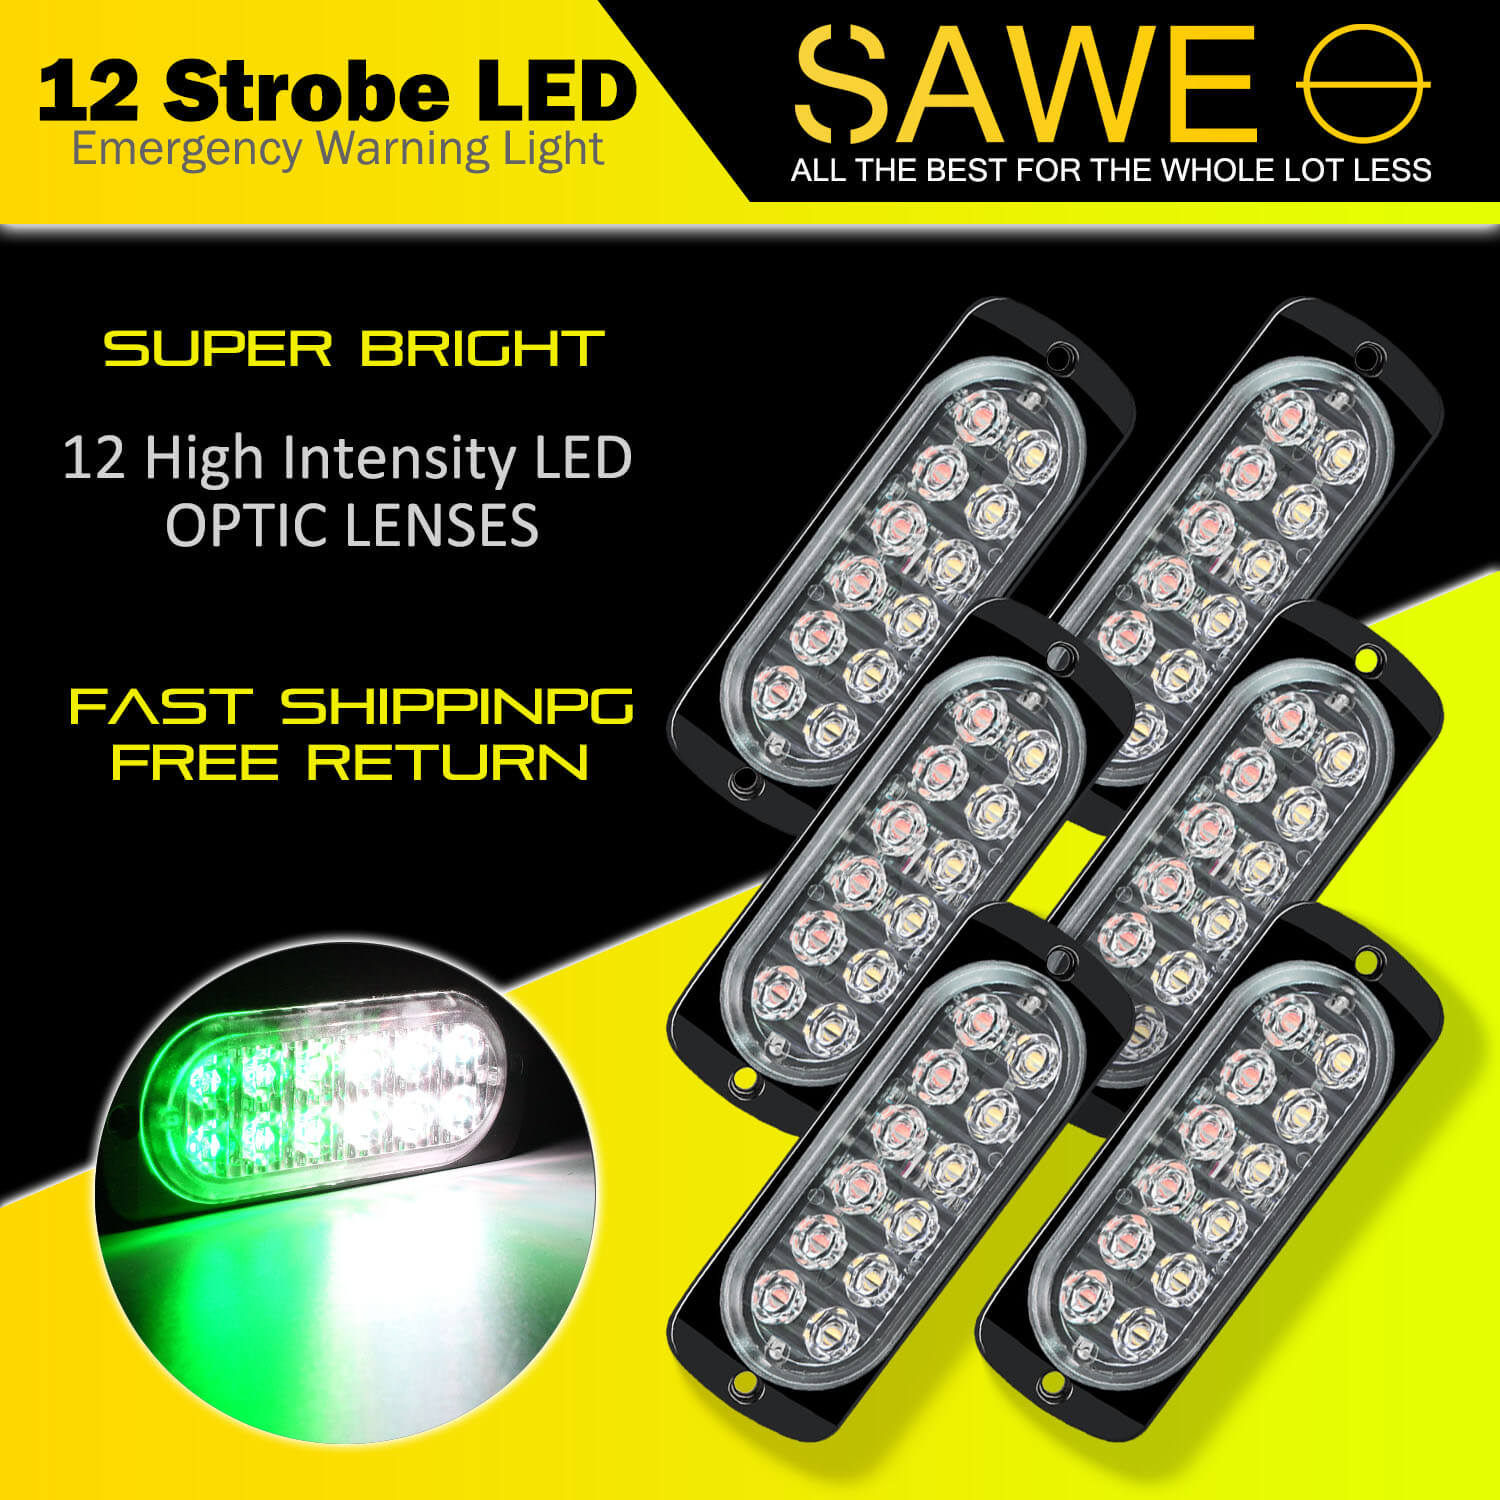 Emergency LED Strobe Lights Bar for Offroad Car Truck Warning Hazard Flash Grille and Surface Mount Light - Green / White 12-LED